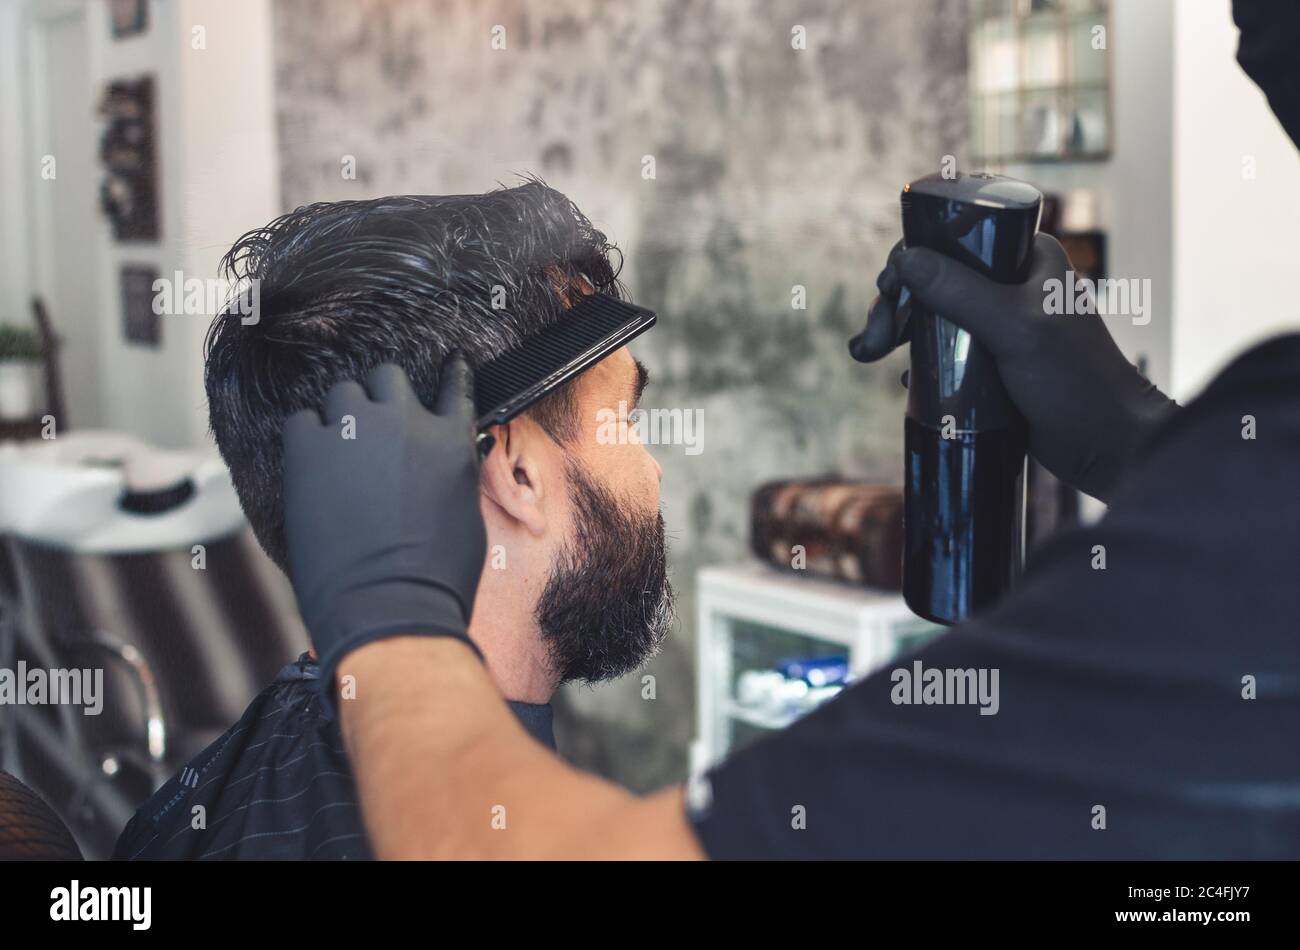 Barber wetting a client's hair with a sprayer from the background Stock Photo